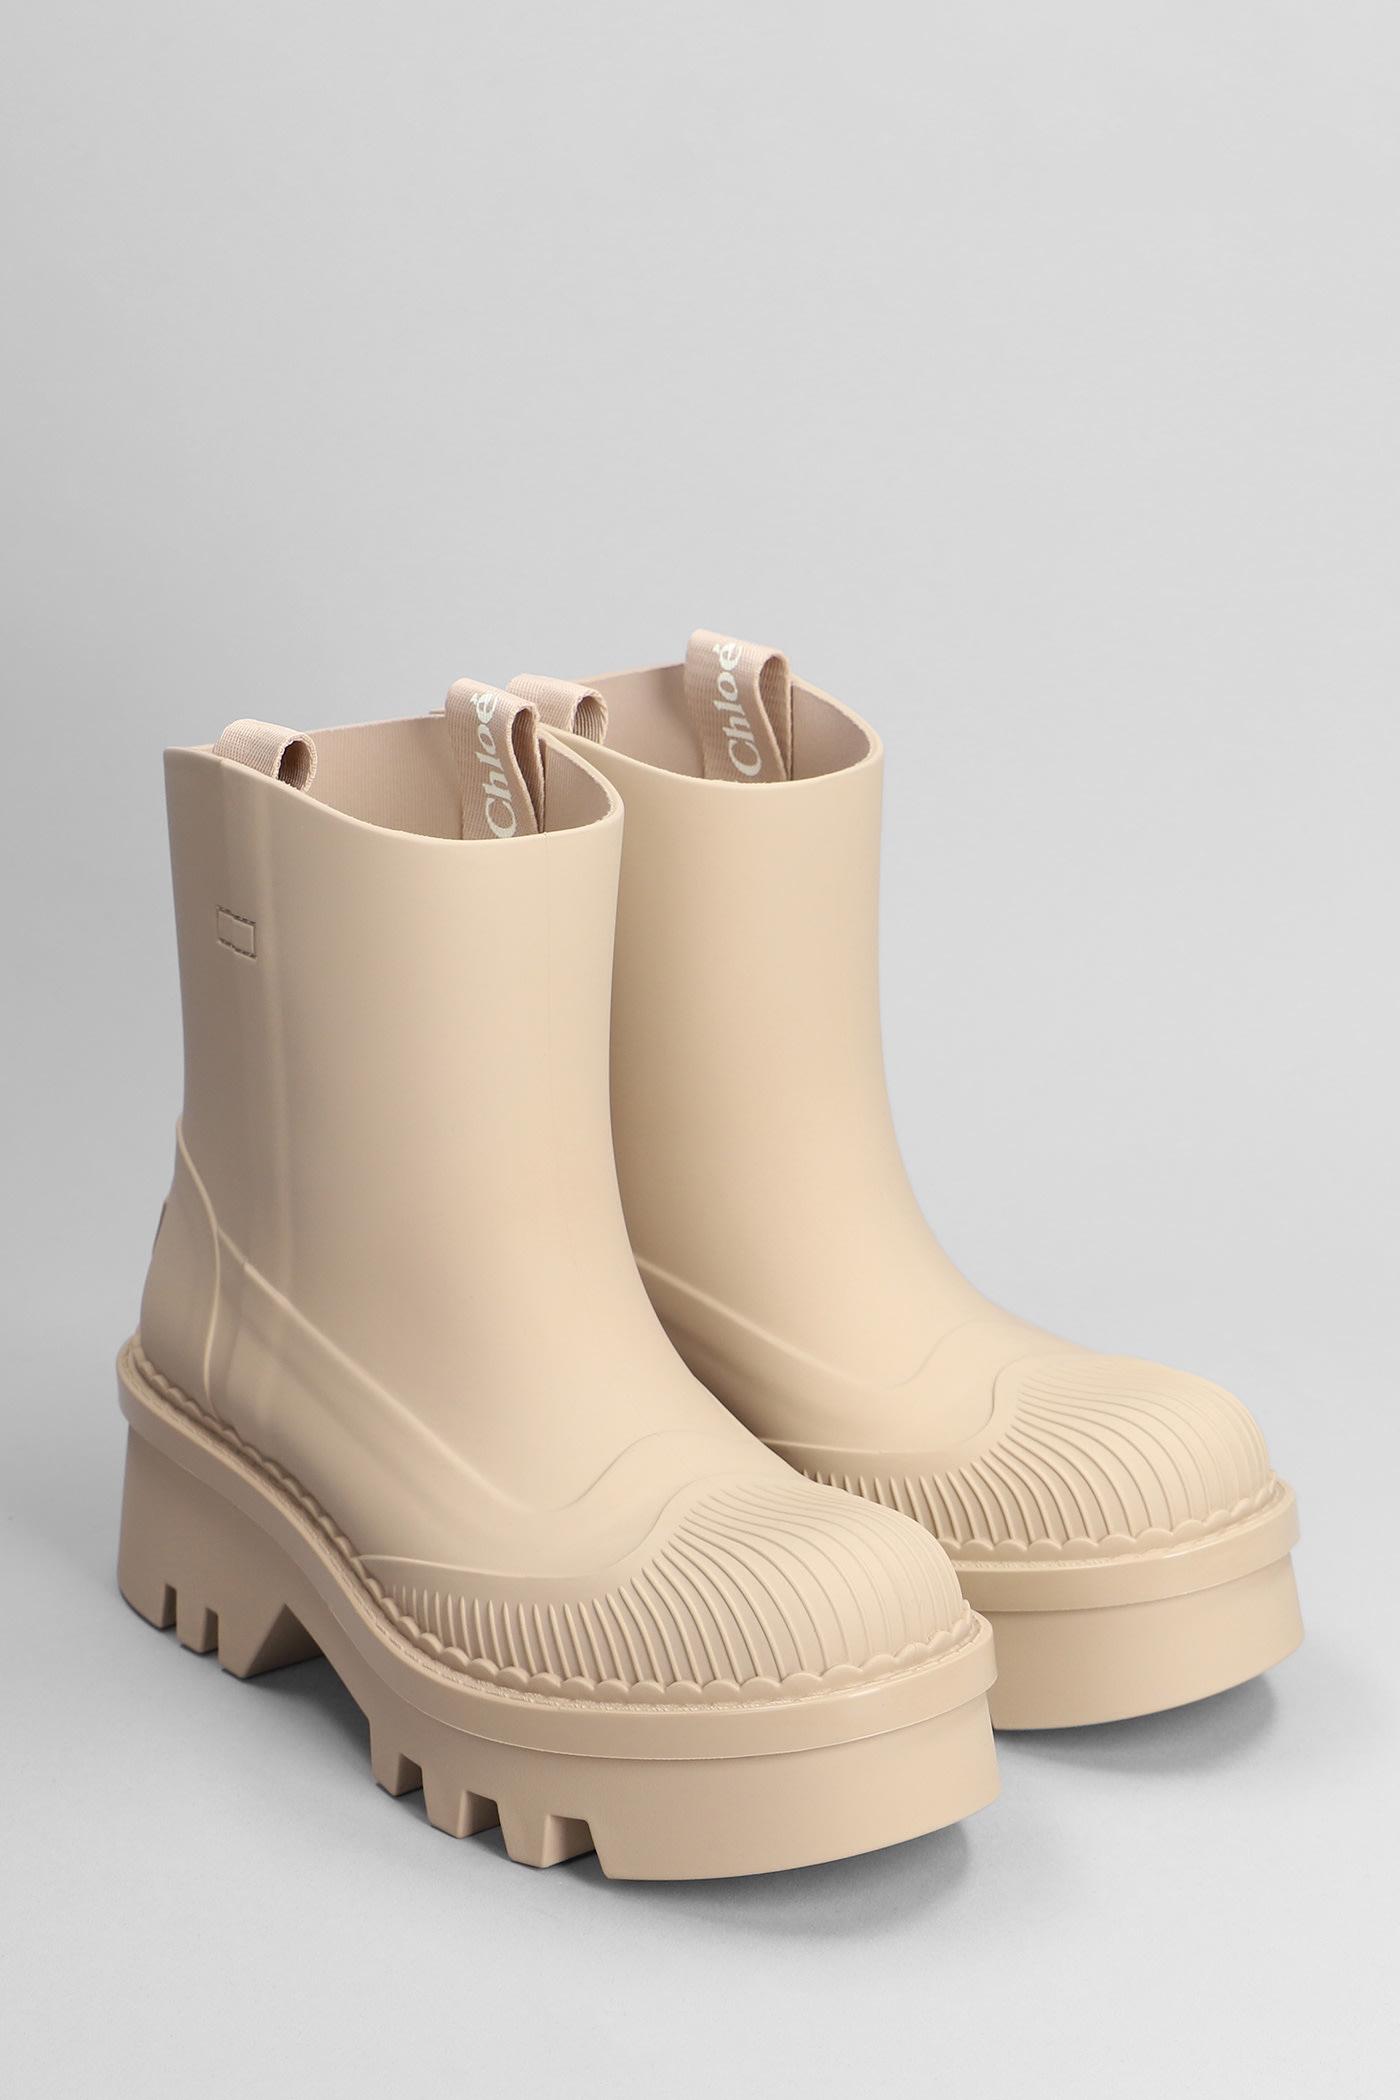 Chloé Rainboots Combat Boots In Powder Rubber/plasic in Natural | Lyst UK